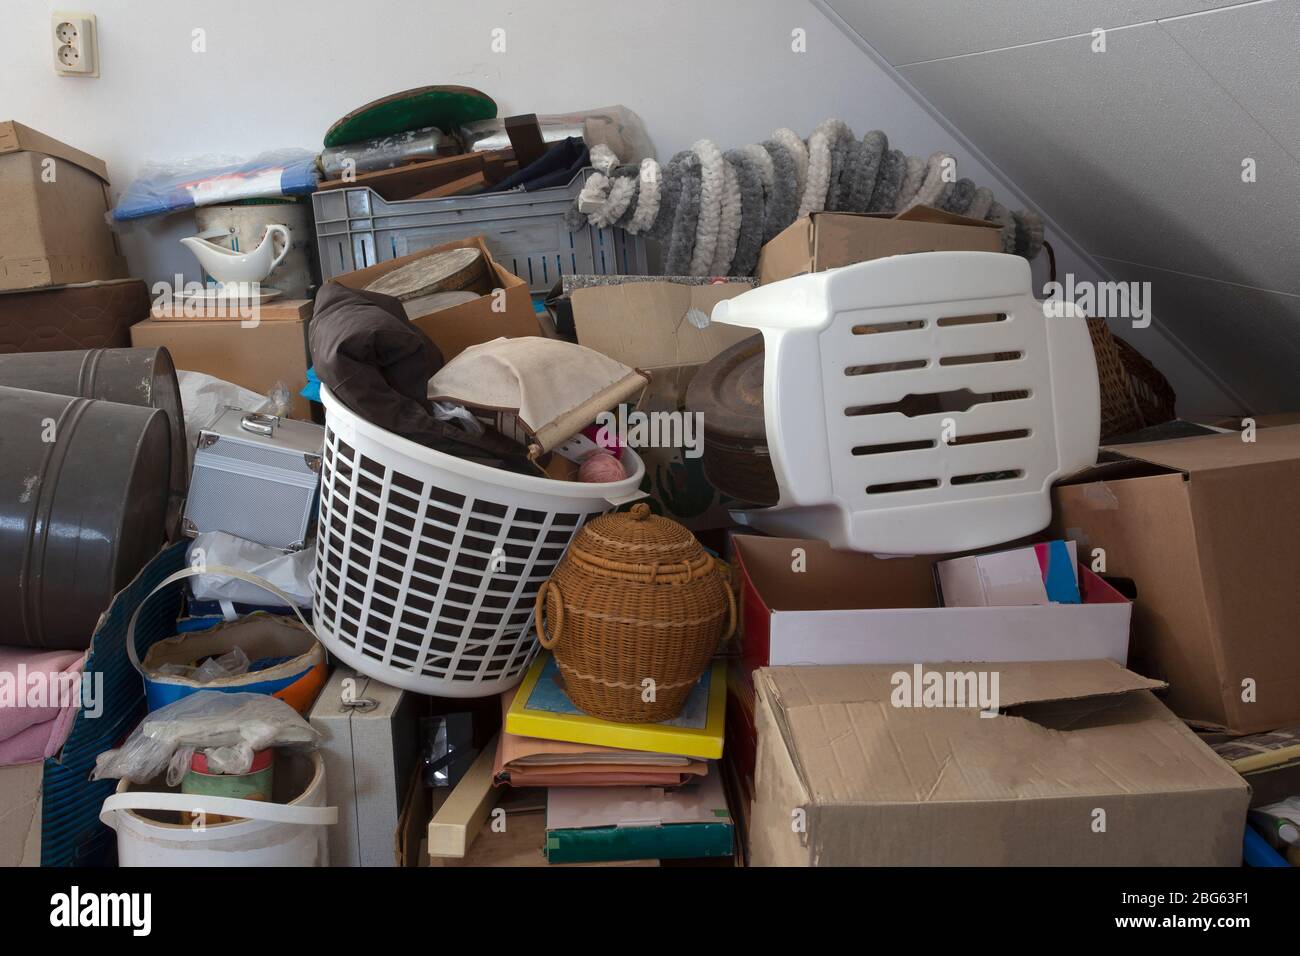 Pile of junk in a house, hoarder room pile of household equipment needs clearing out Stock Photo